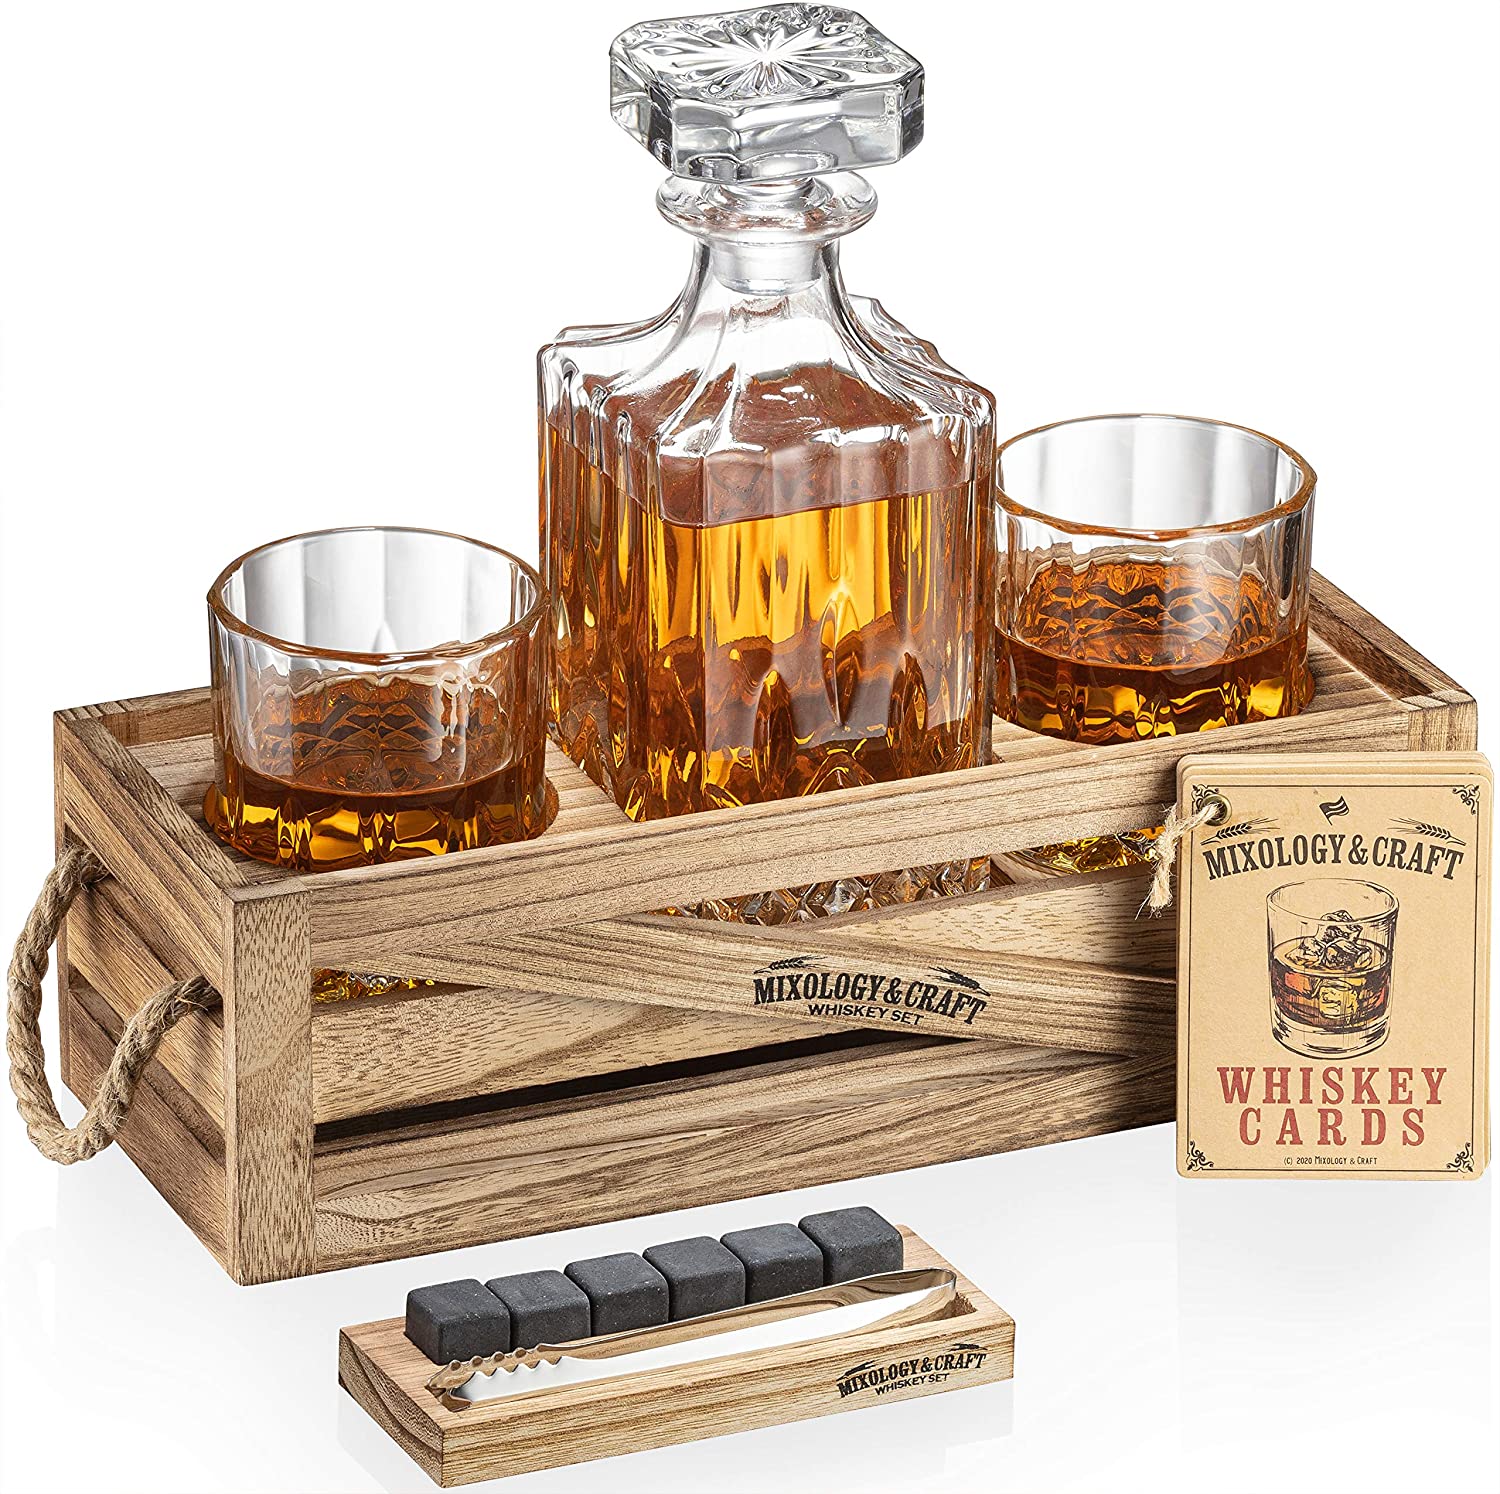 Amazion whisky stone gift set including whiskey decanter wine glass wooden holder Featured Image